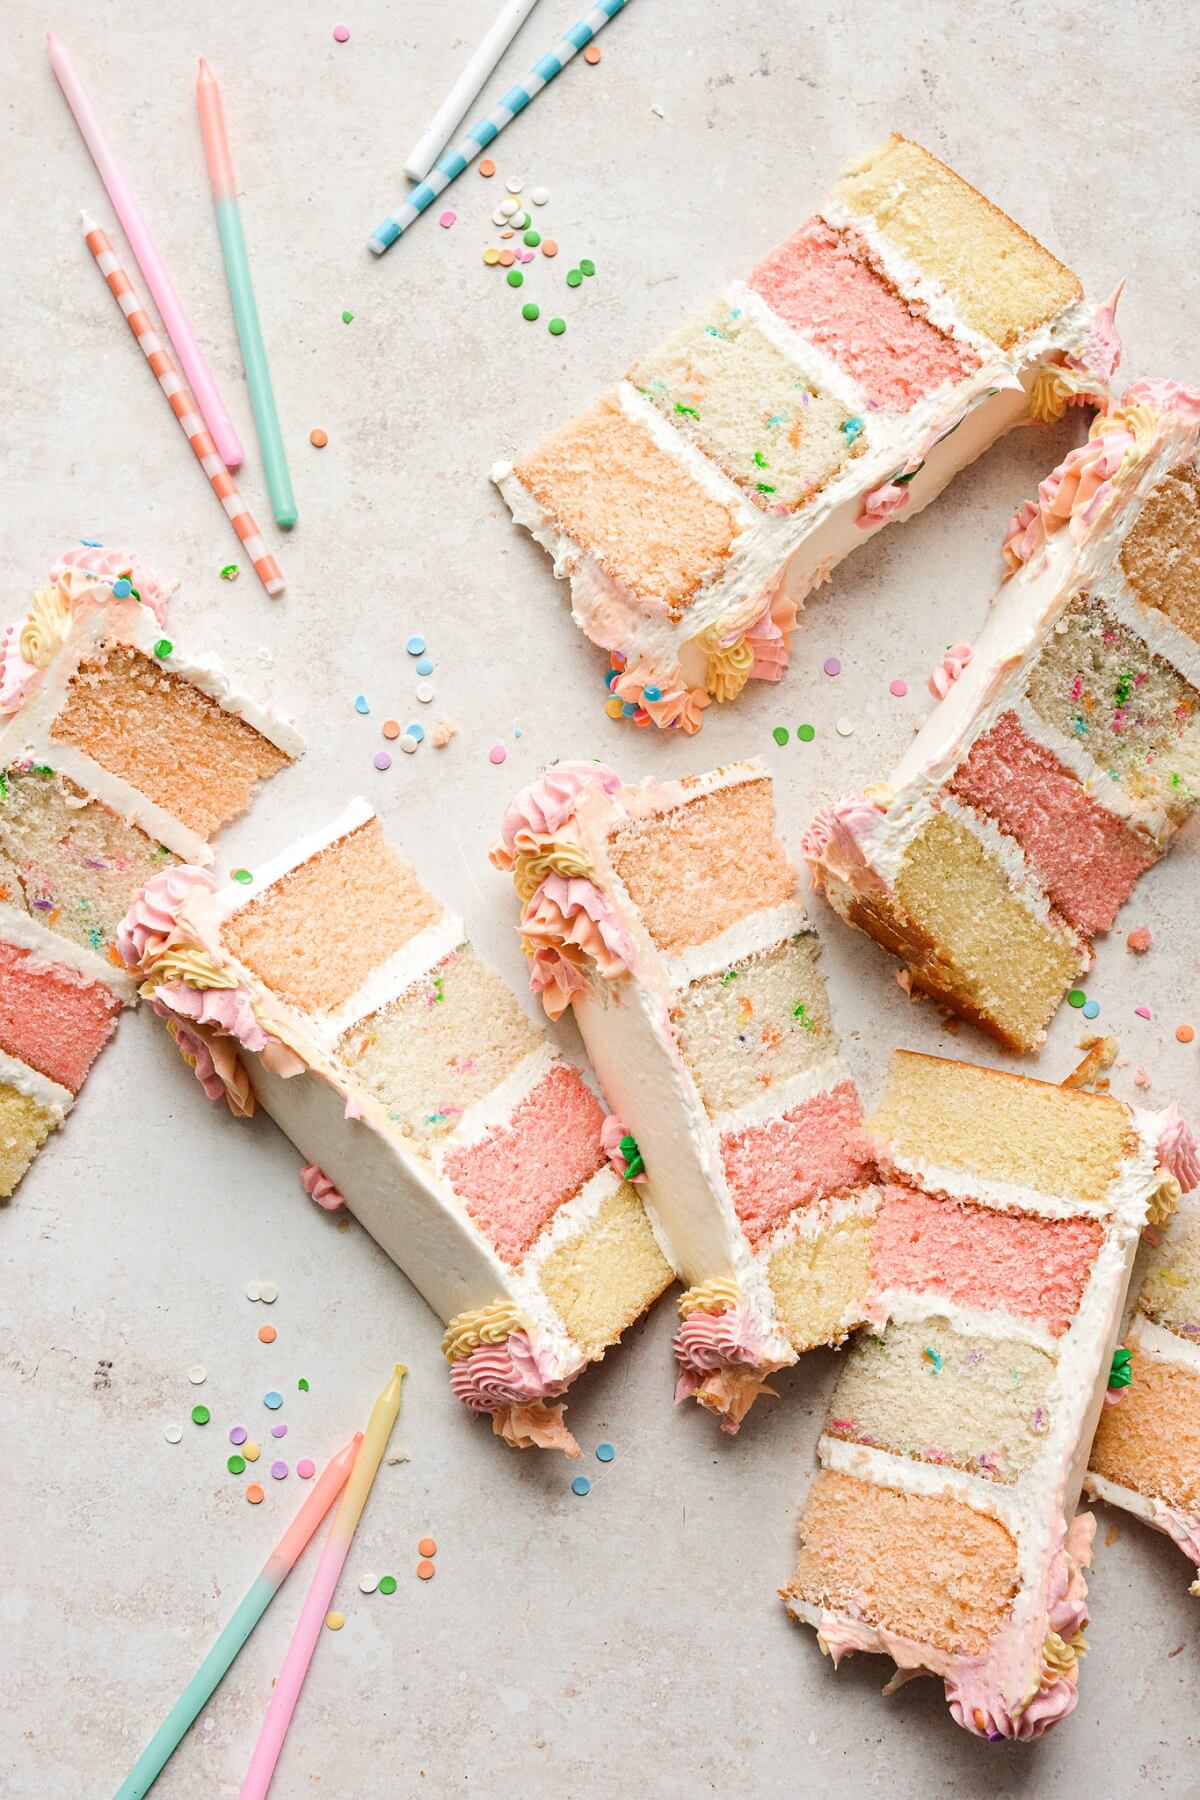 Slices of birthday cake surrounded by sprinkles and candles.